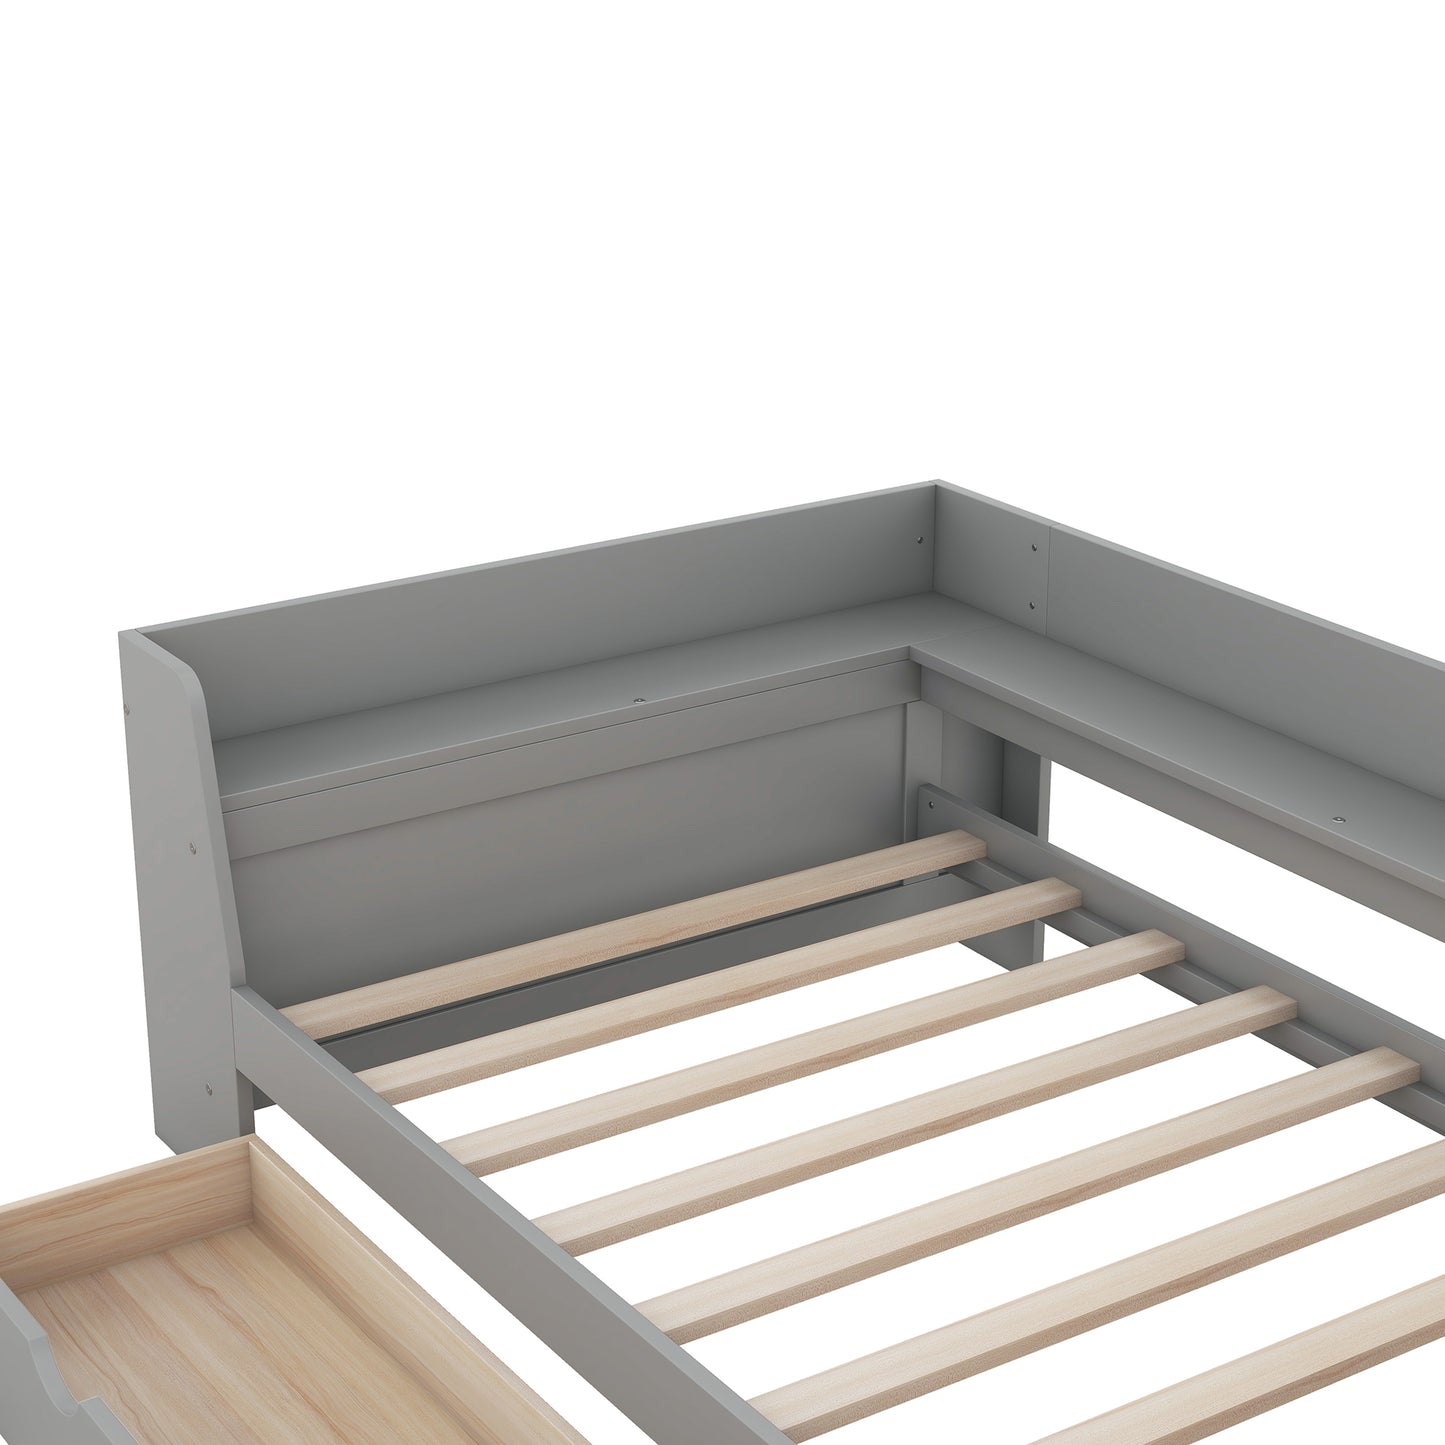 Twin Size Daybed with Shelves, Drawers and Built-In Charging Station, Gray